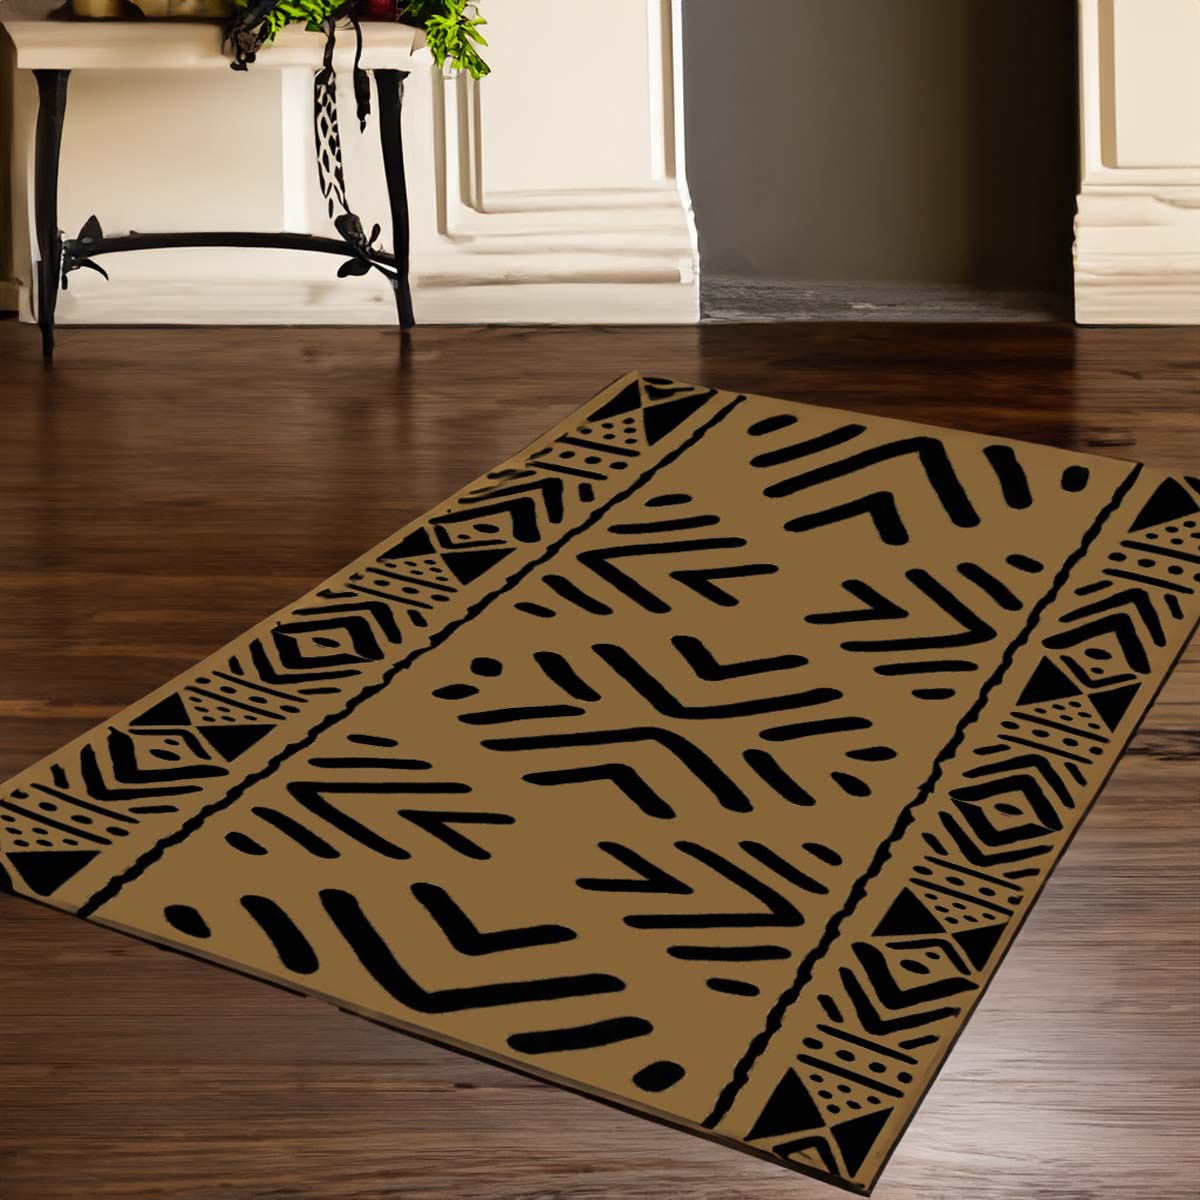 African Area Rug: Authentic Bogolan Decor for Stylish Homes